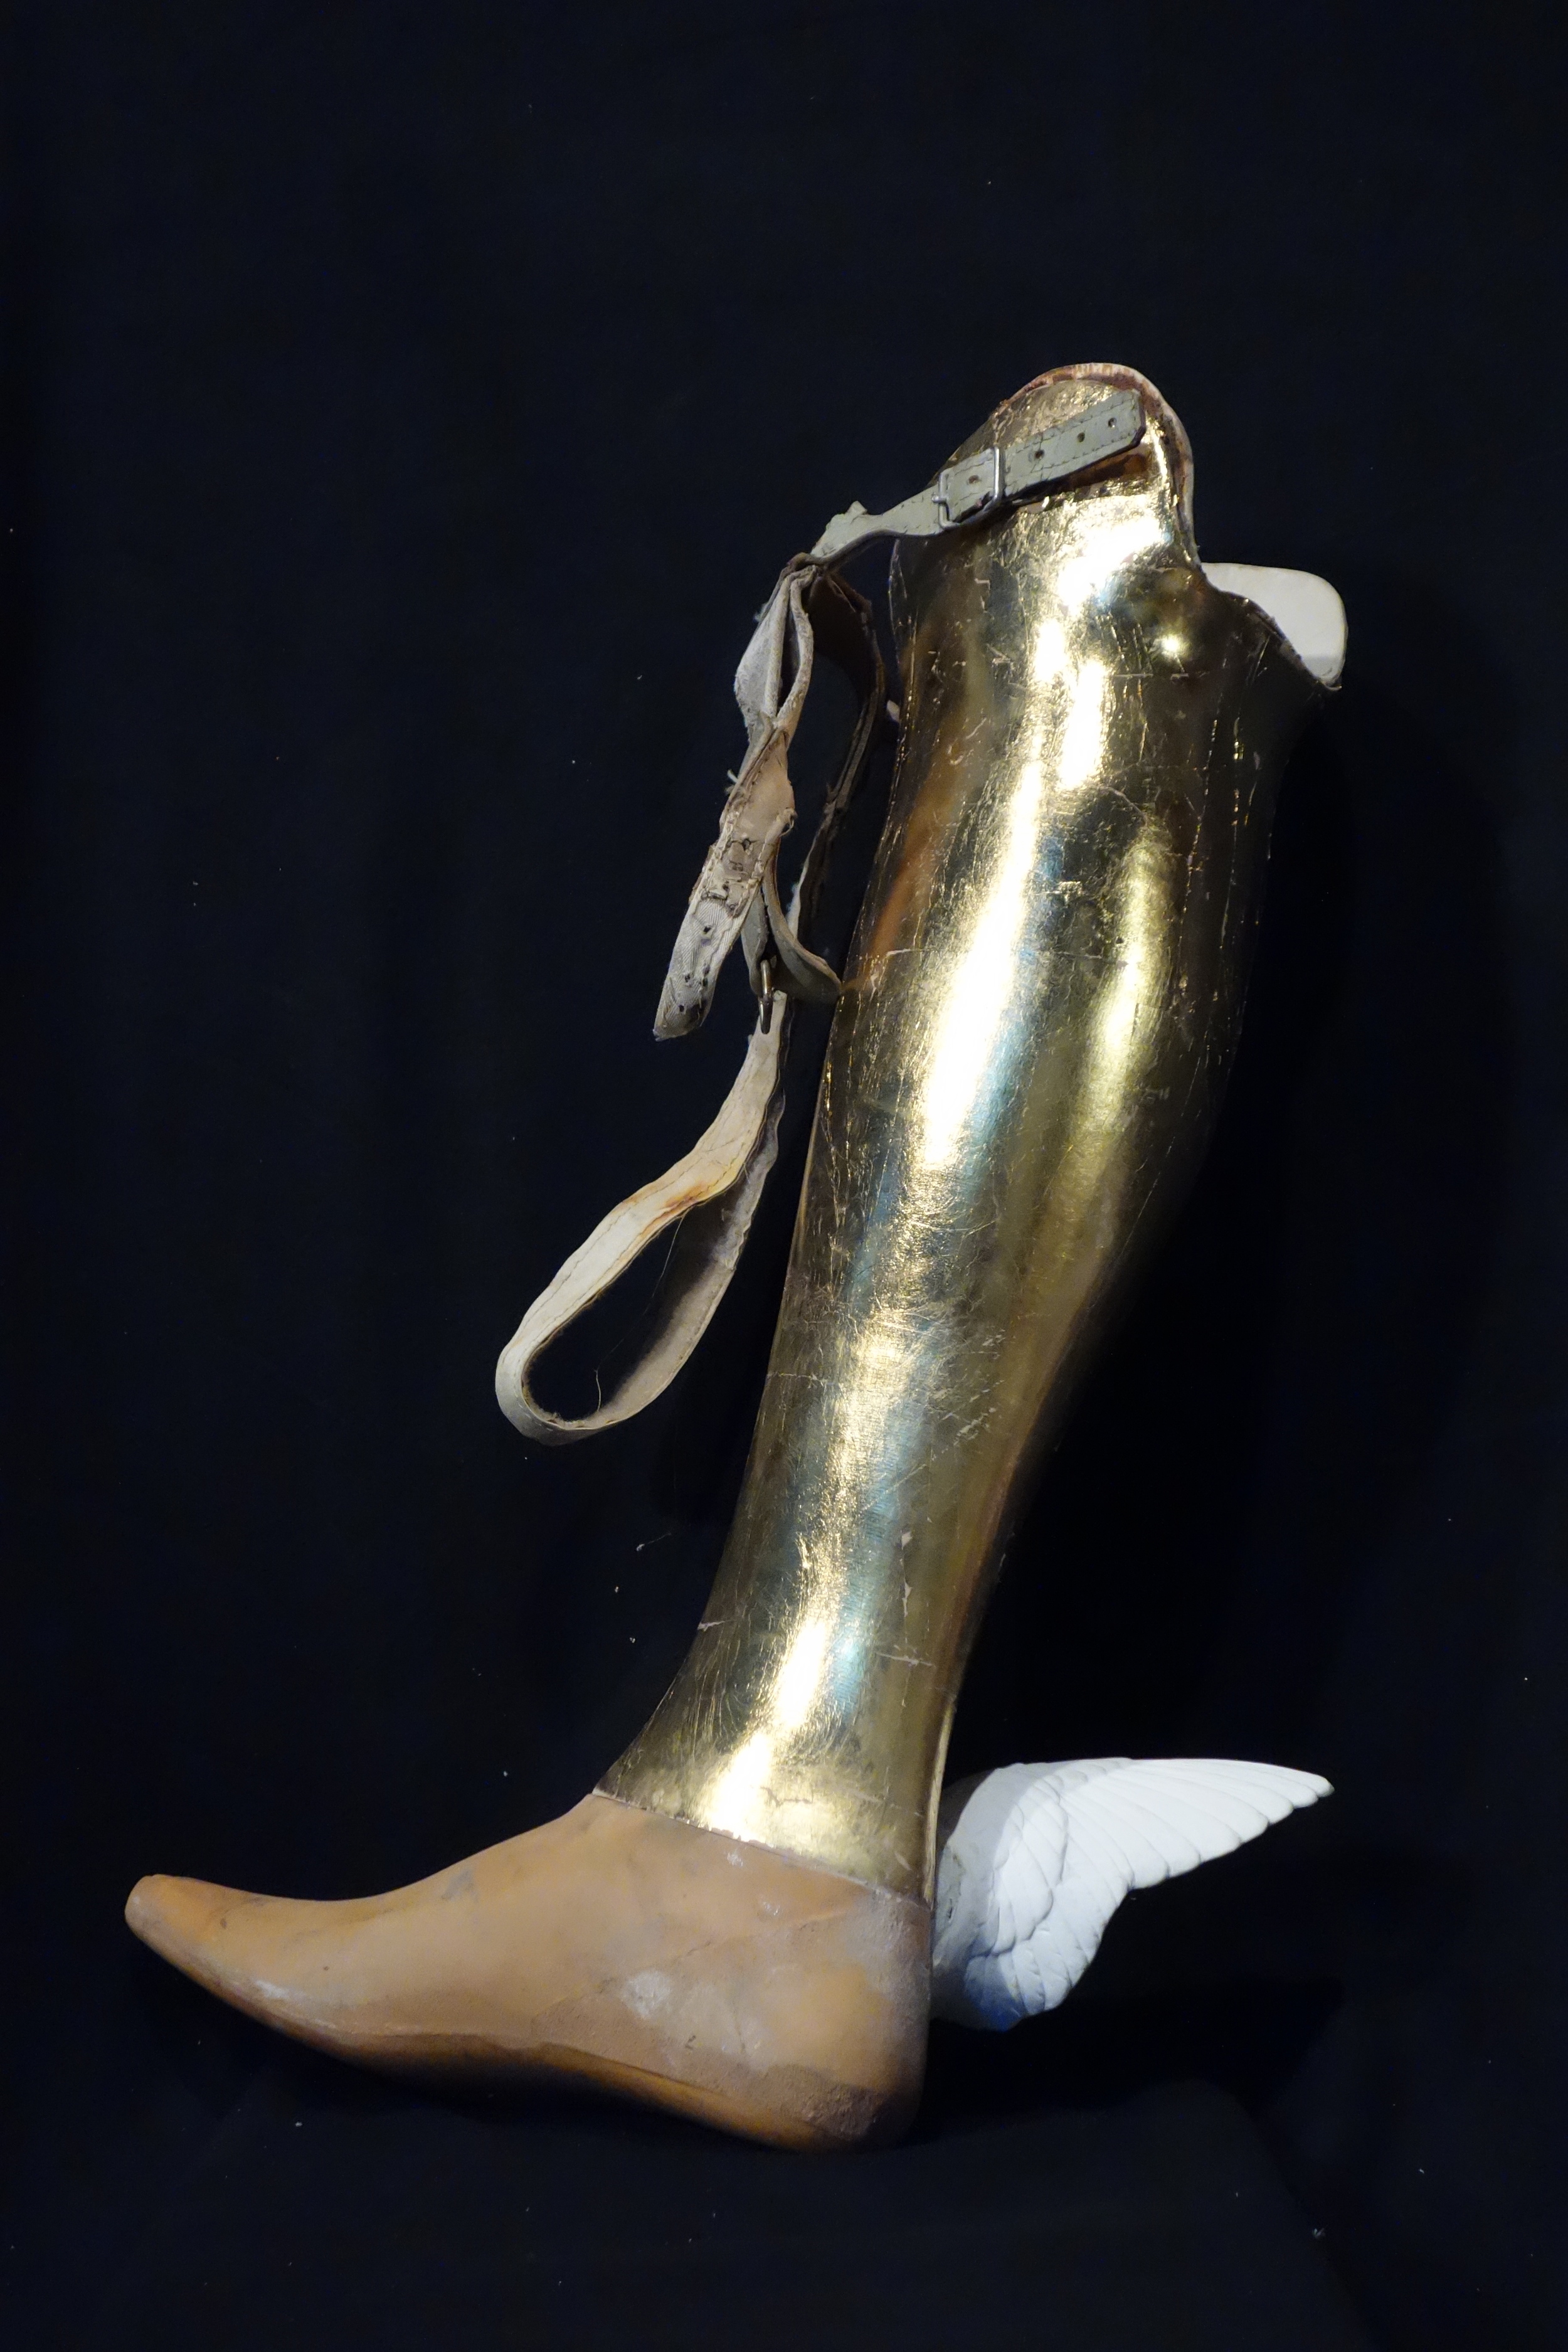 Golden Calf, 2014, gilded prosthetic leg and plaster, 22x15x6 inches